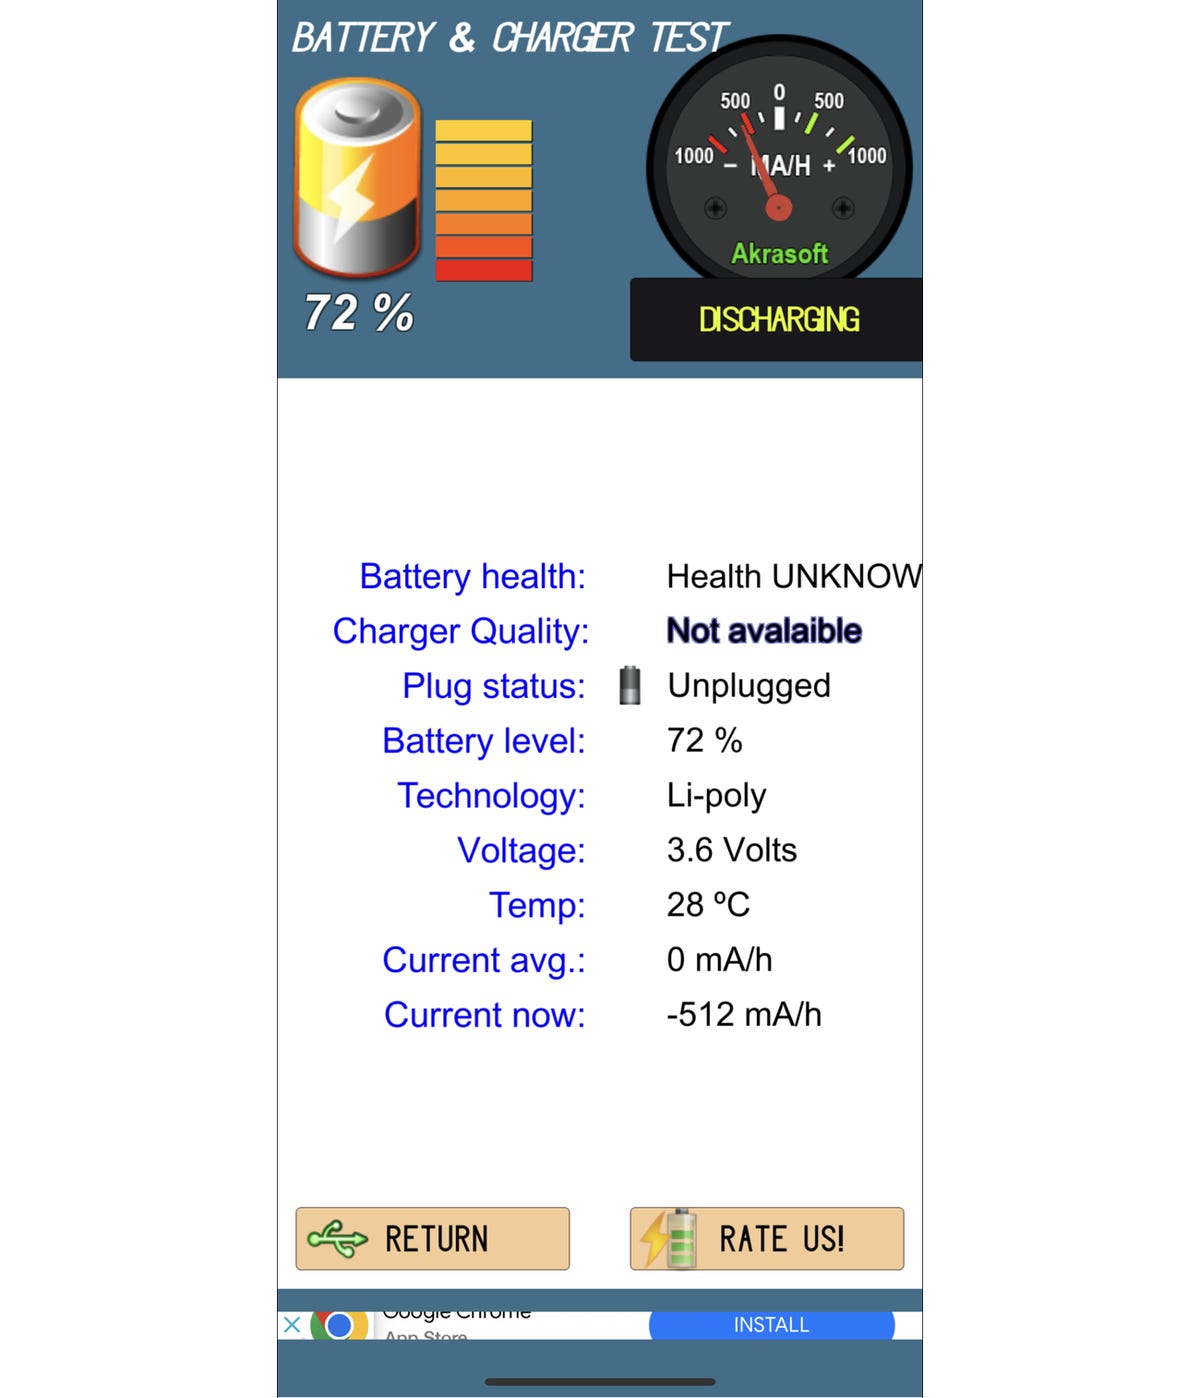 Battery charge and test app shows internal sensor temperature